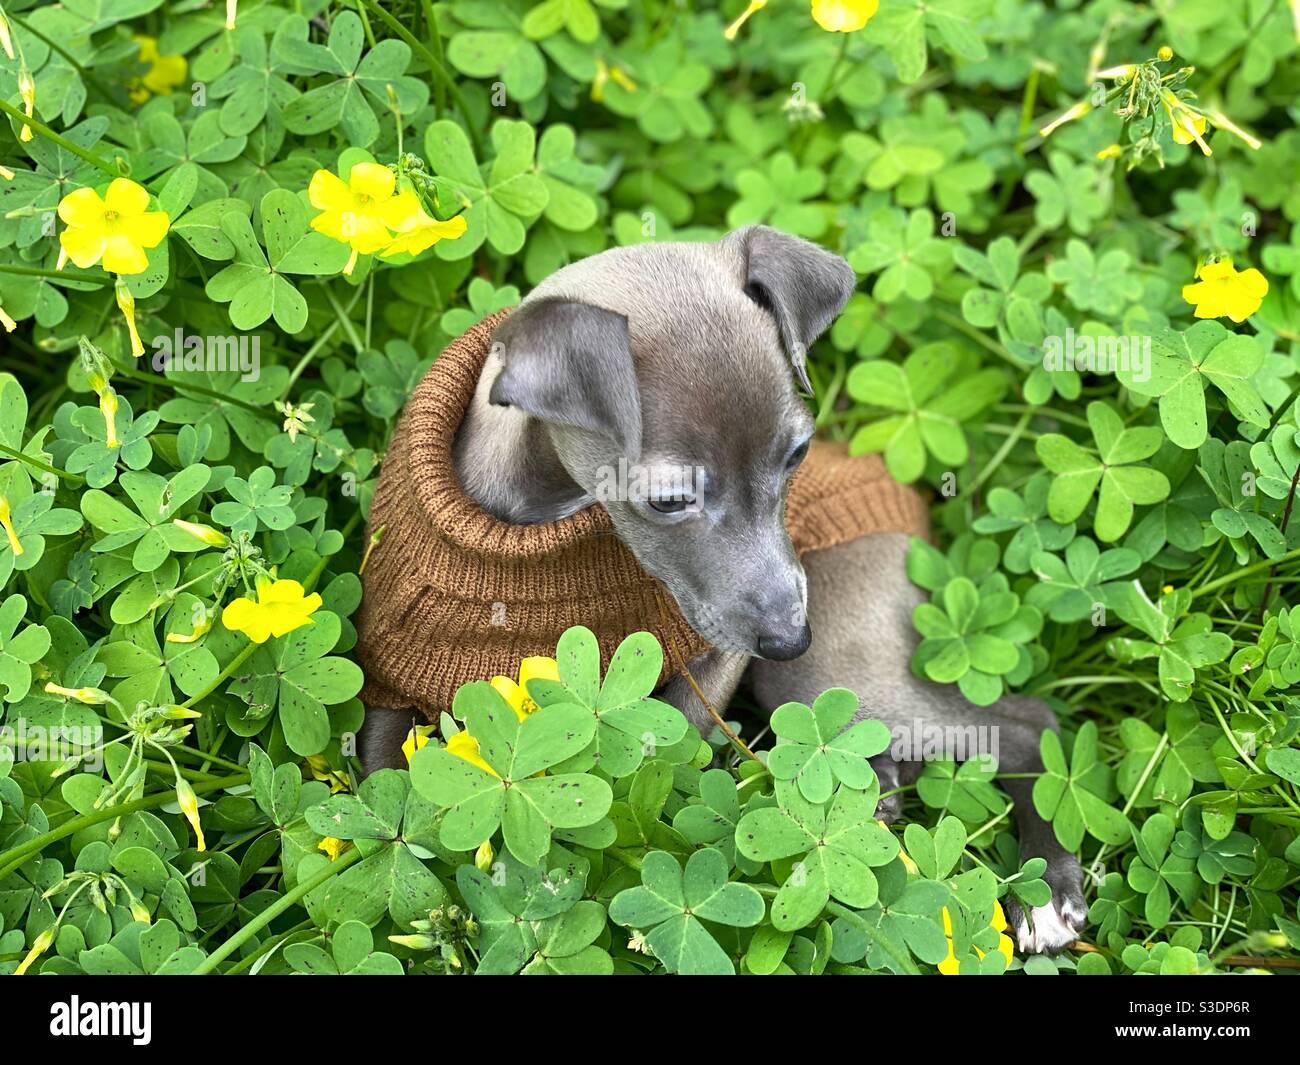 Puppy Italian greyhound surrounded by clovers Stock Photo